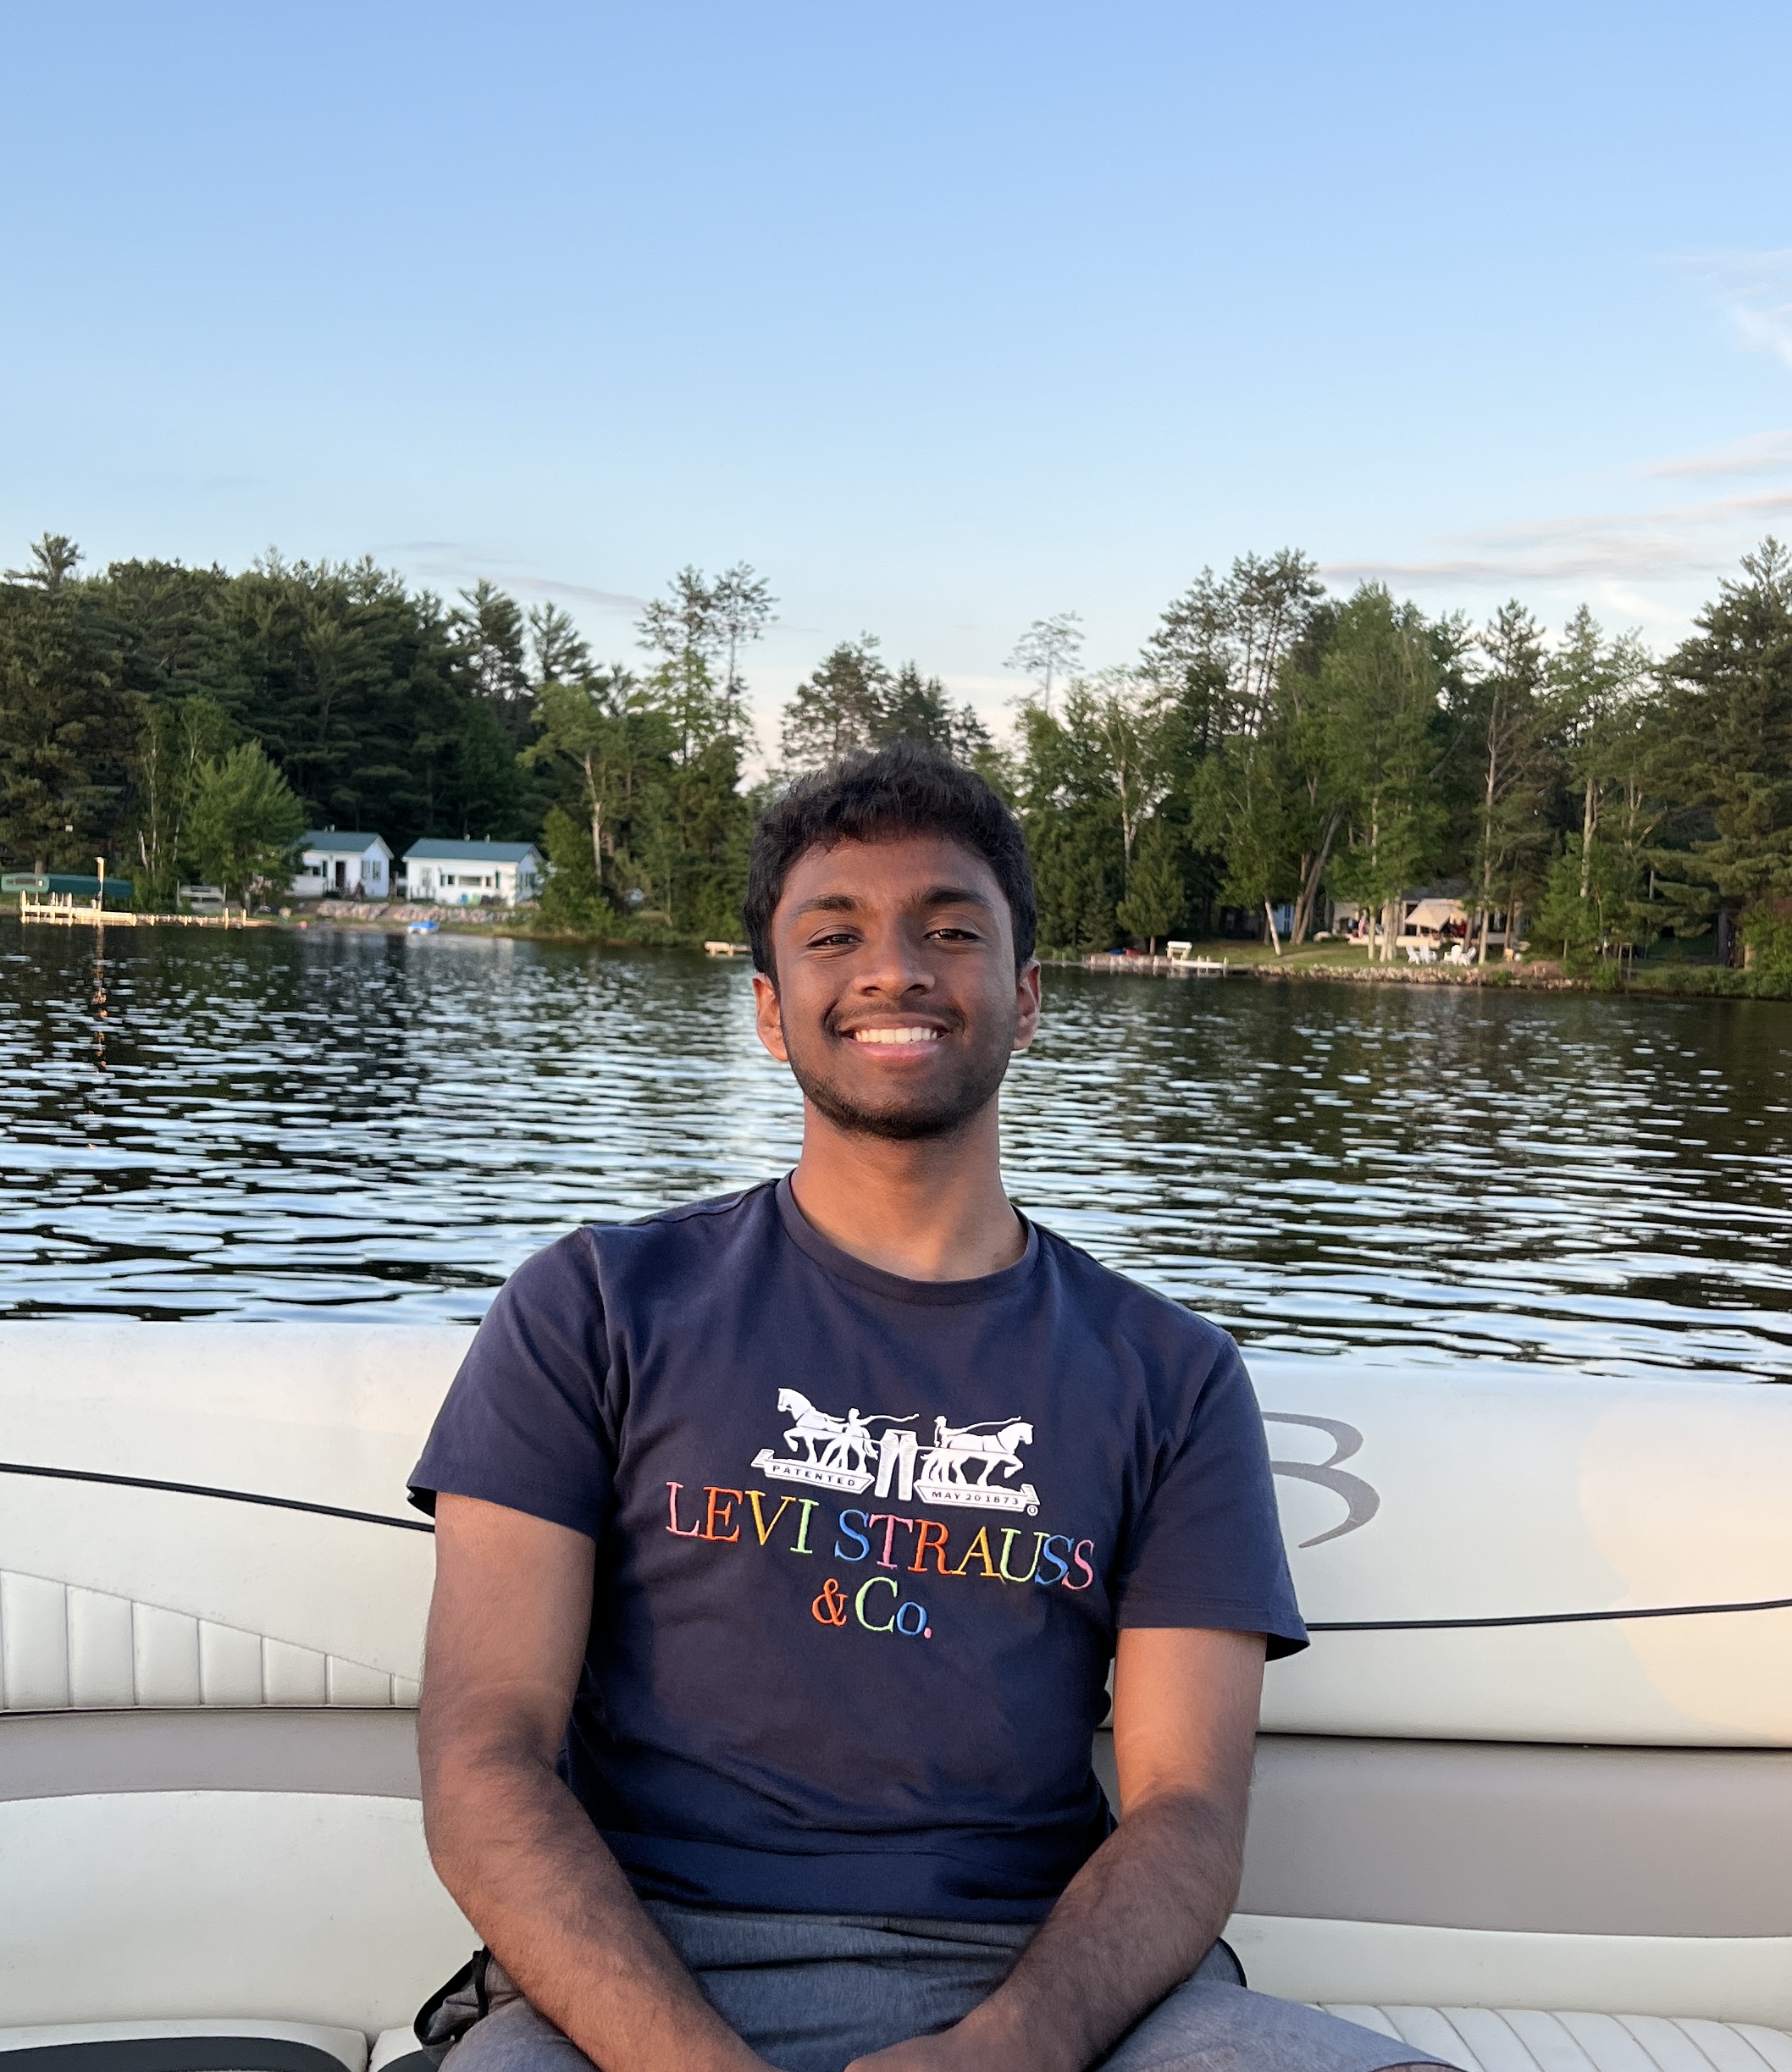 Akshay Peddi poses on a boat on a lake with trees in the background